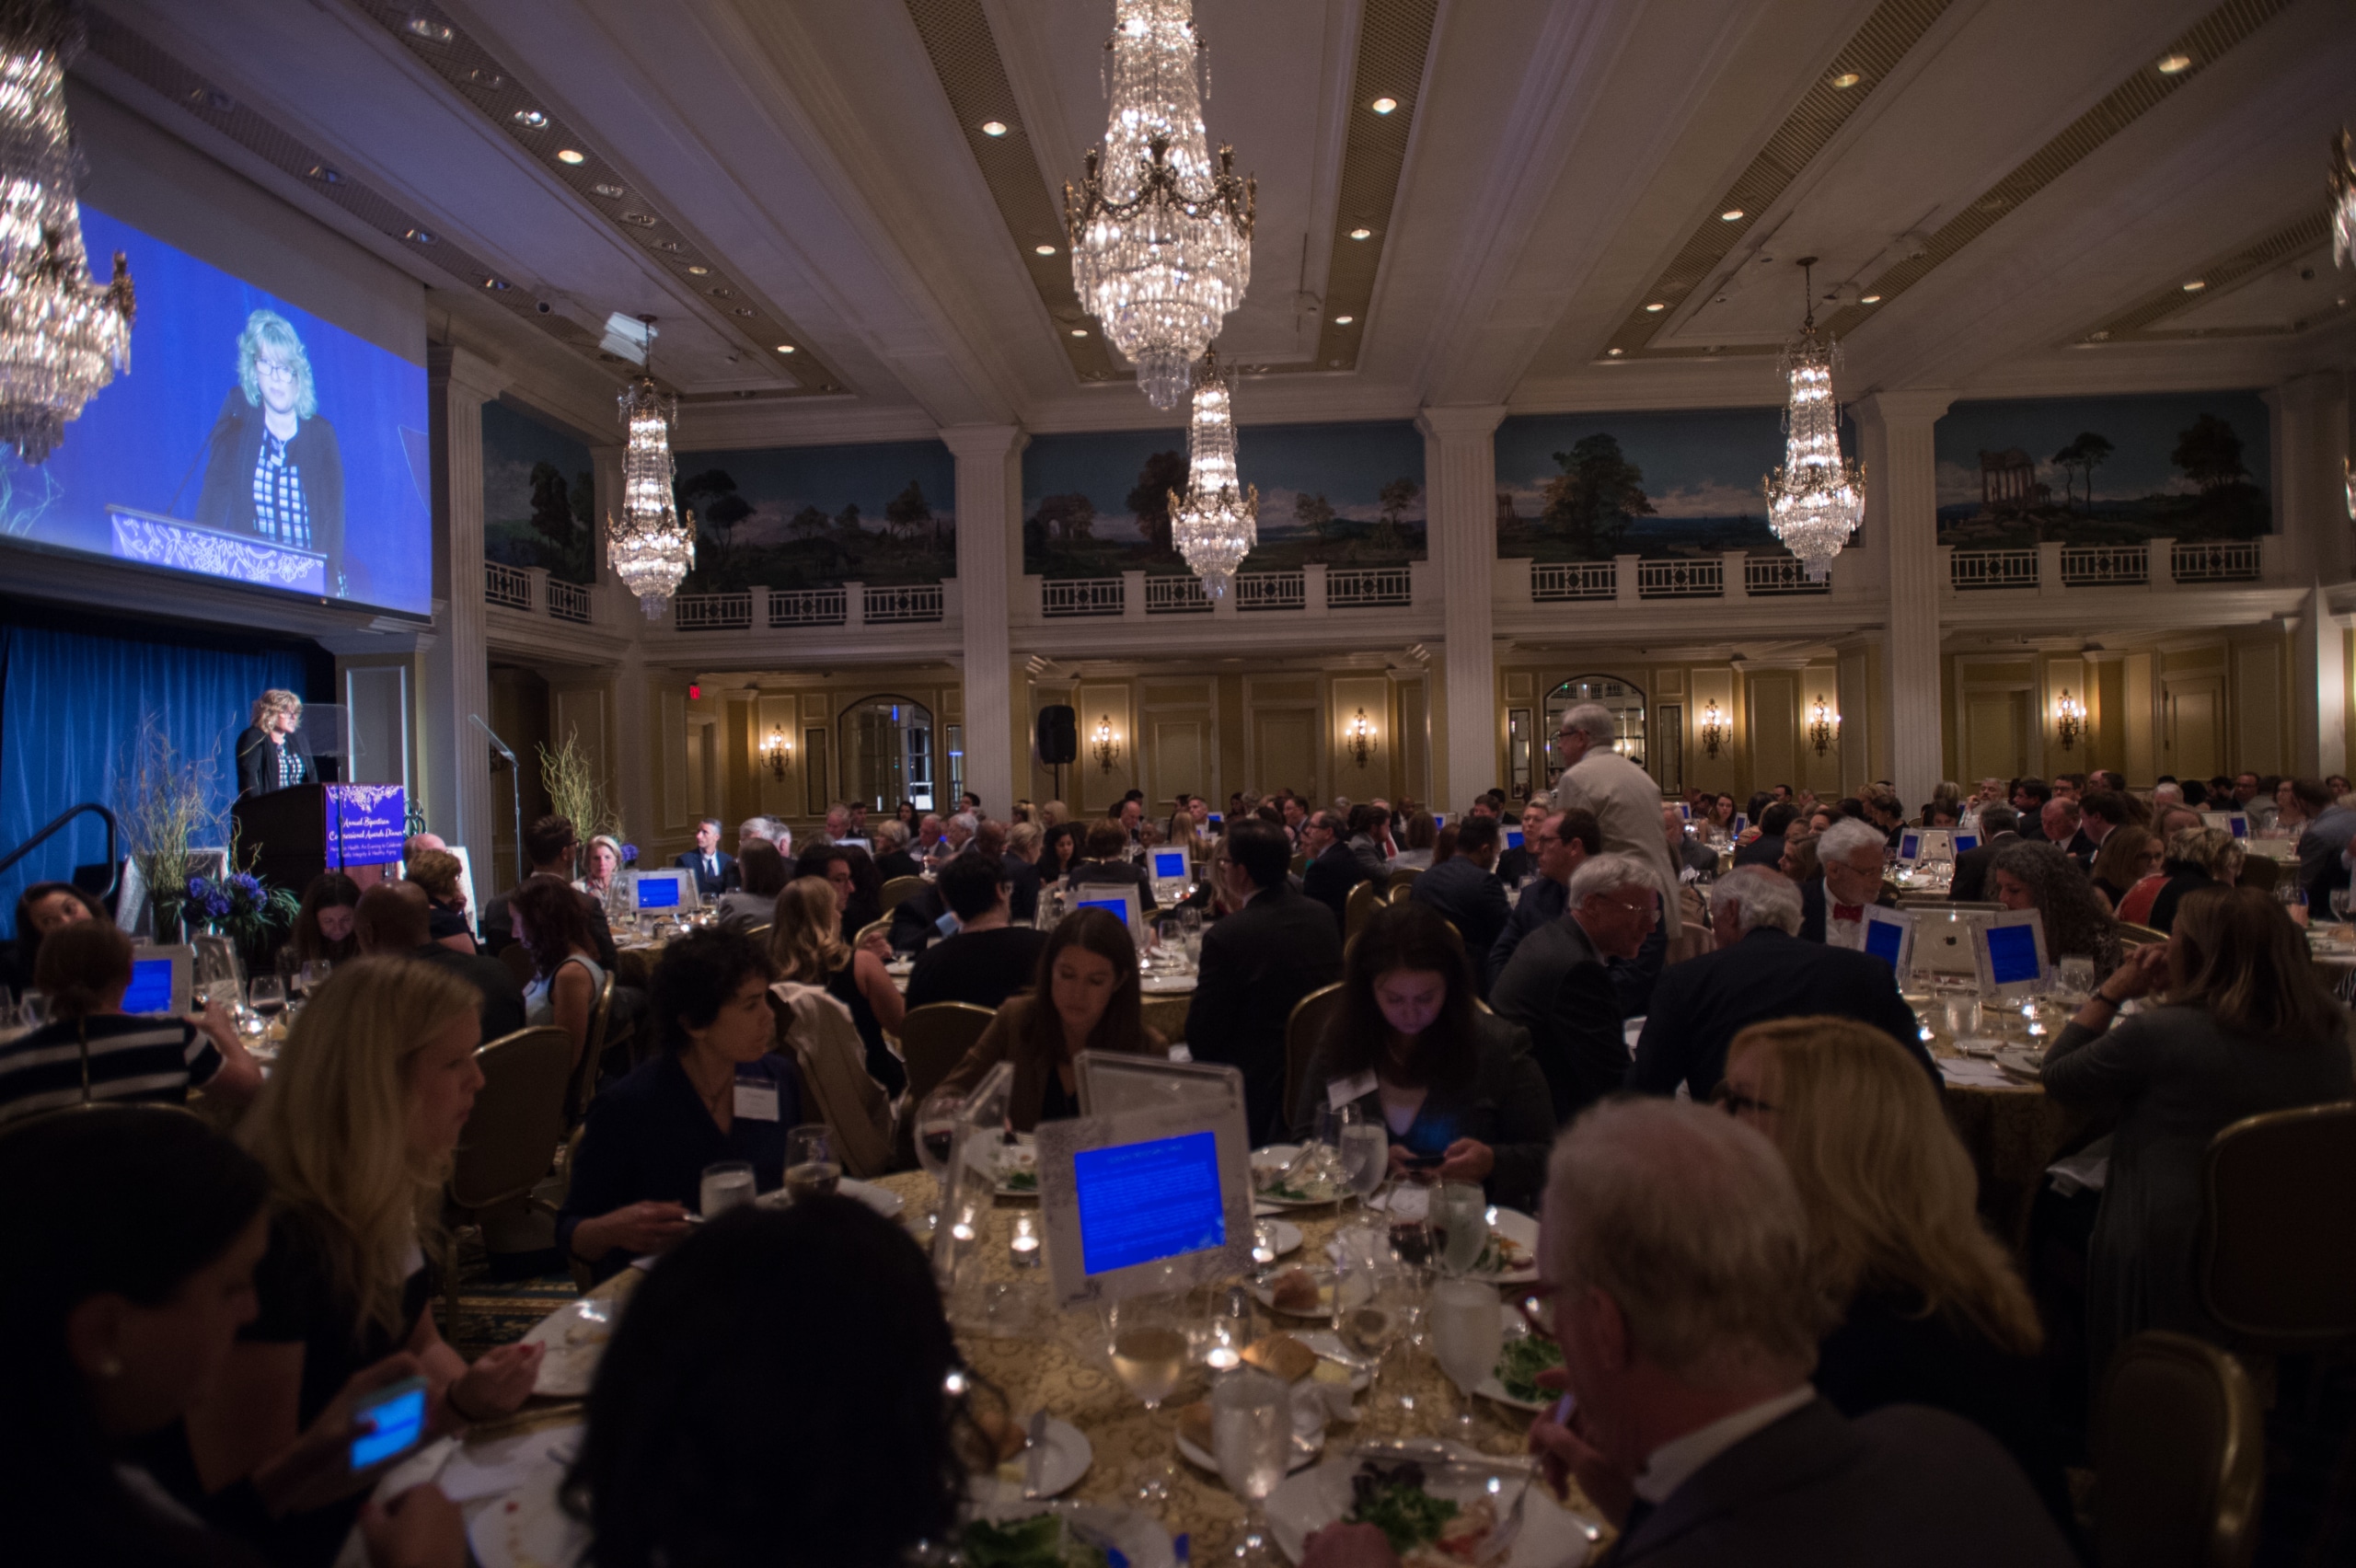 Several full tables at 25th Annual Bipartisan Congressional Awards Dinner.